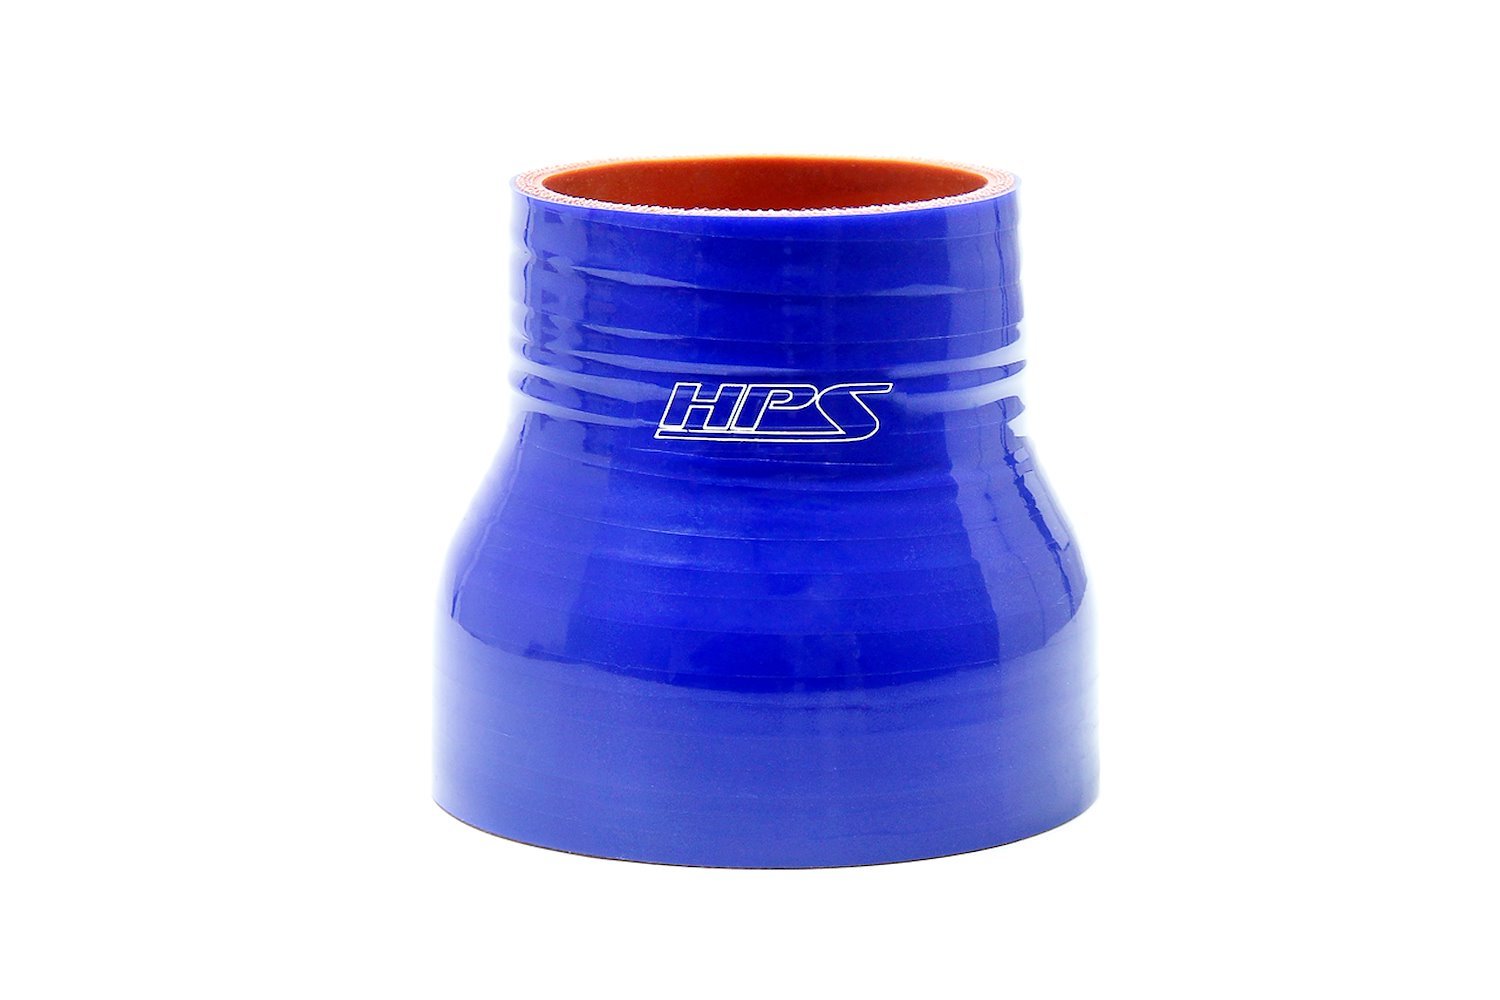 HTSR-250-400-BLUE Silicone Reducer Hose, High-Temp 4-Ply Reinforced, 2-1/2 in. - 4 in. ID, 3 in. Long, Blue